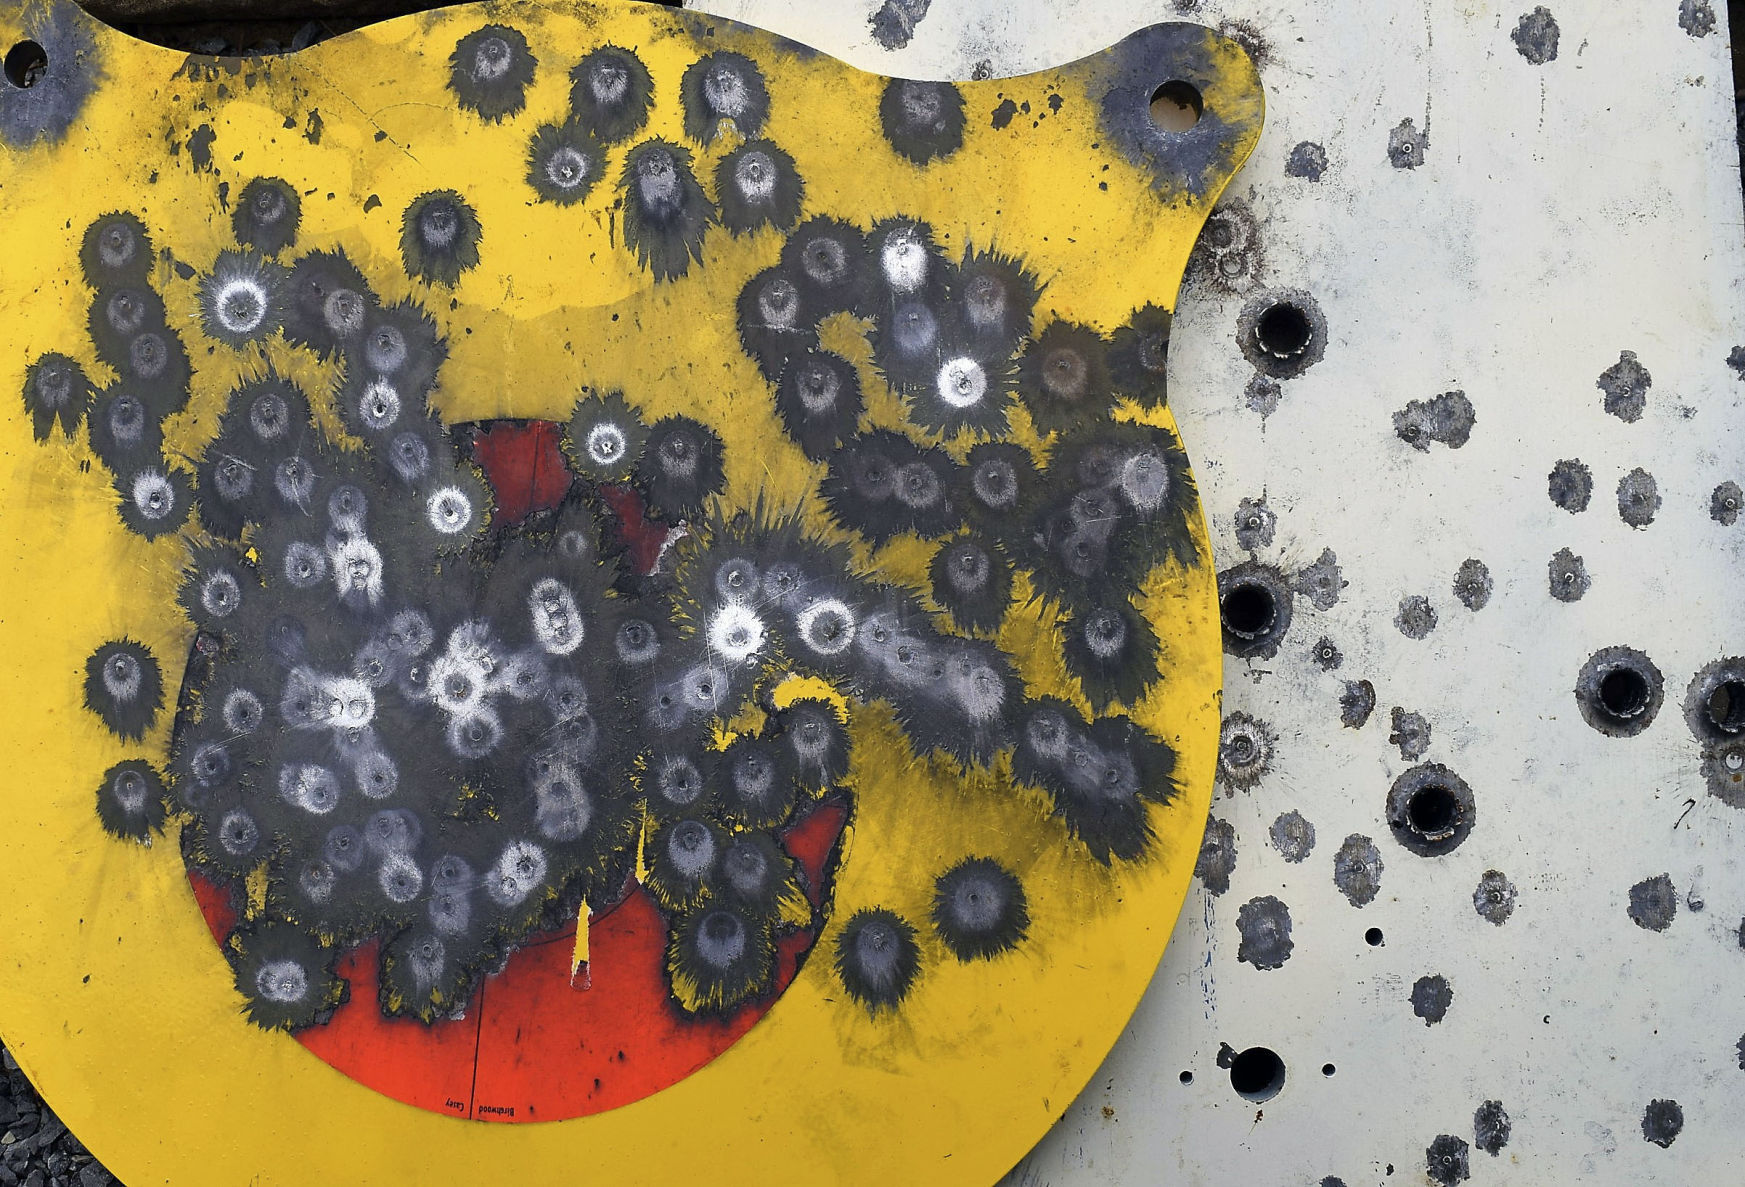 12 Fun Game Targets Hang two downrange. Pick how many shots each player gets